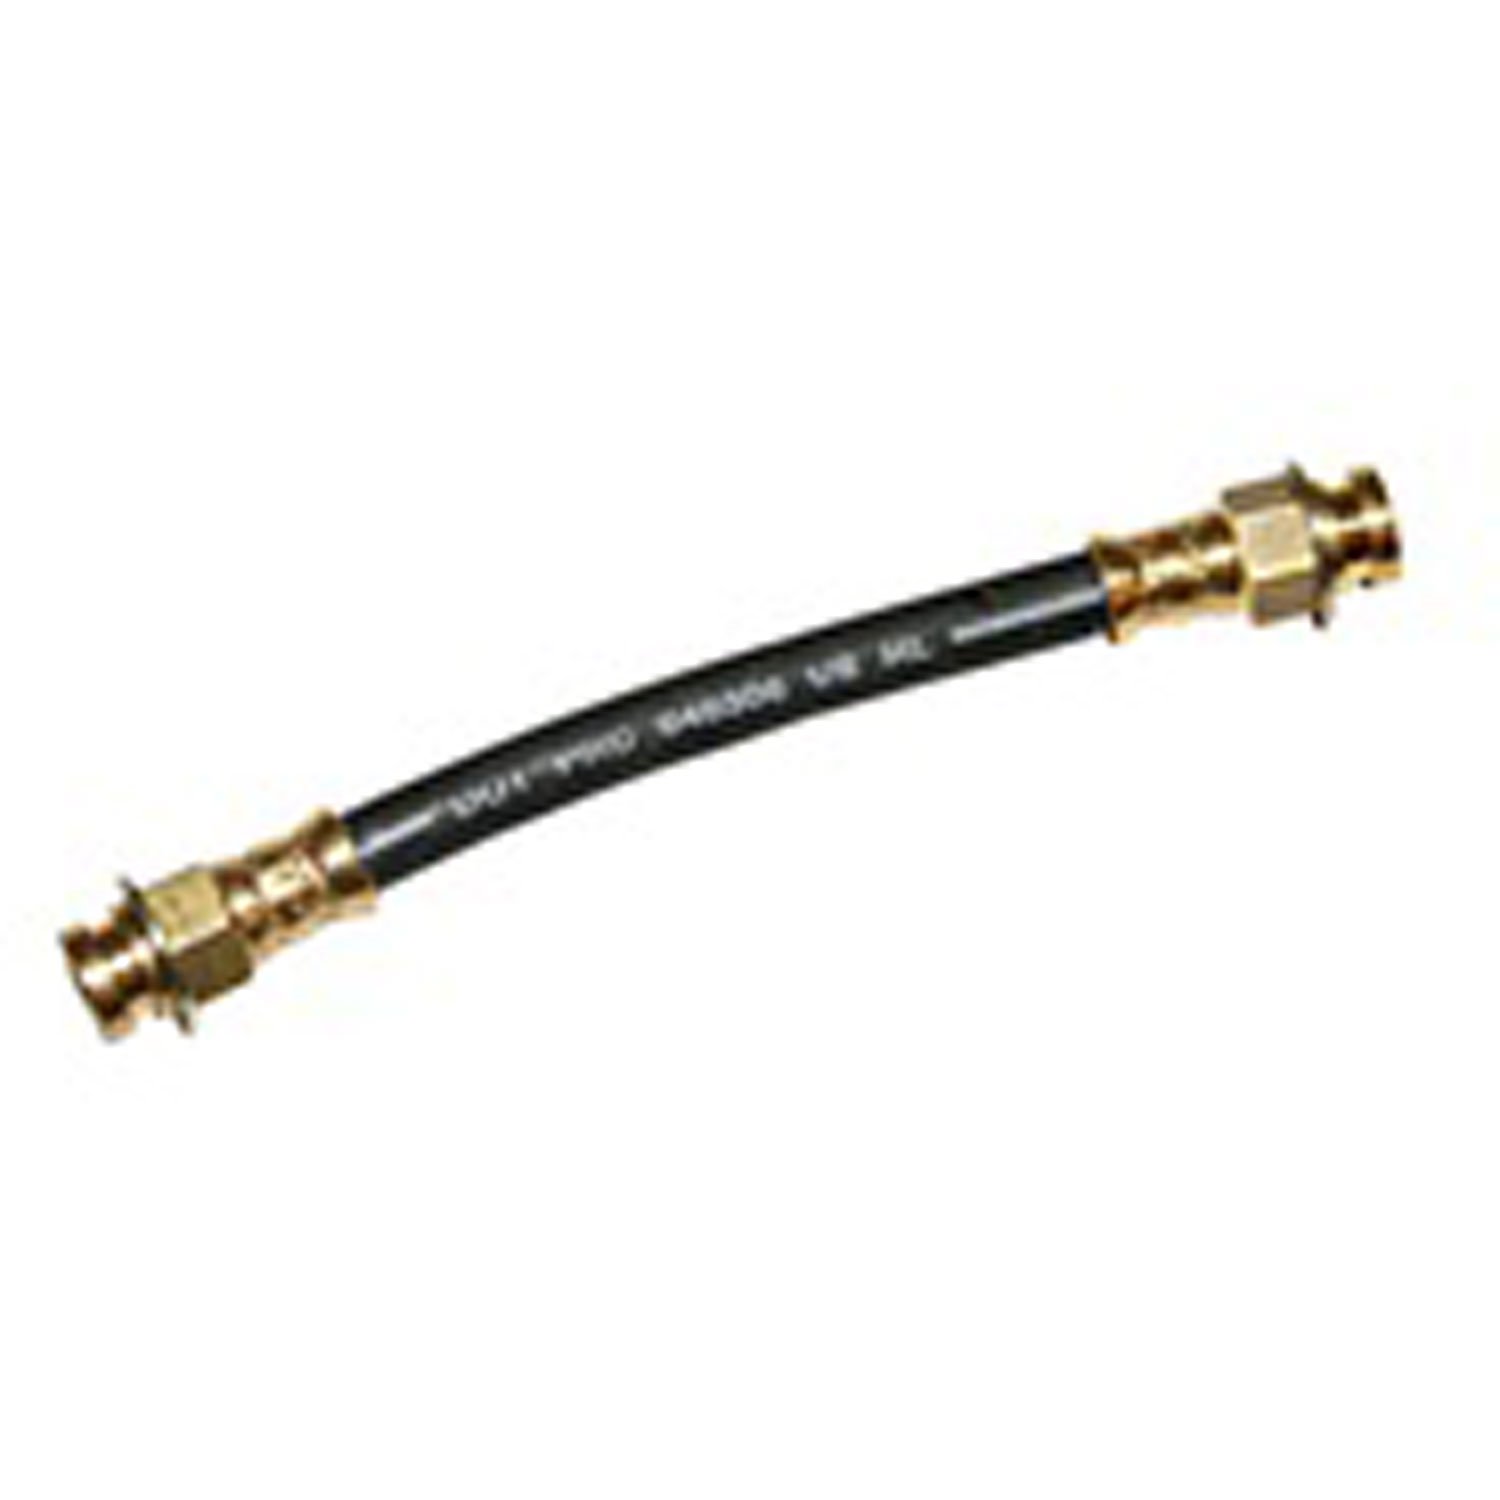 This flexible 7 inch front brake hose from